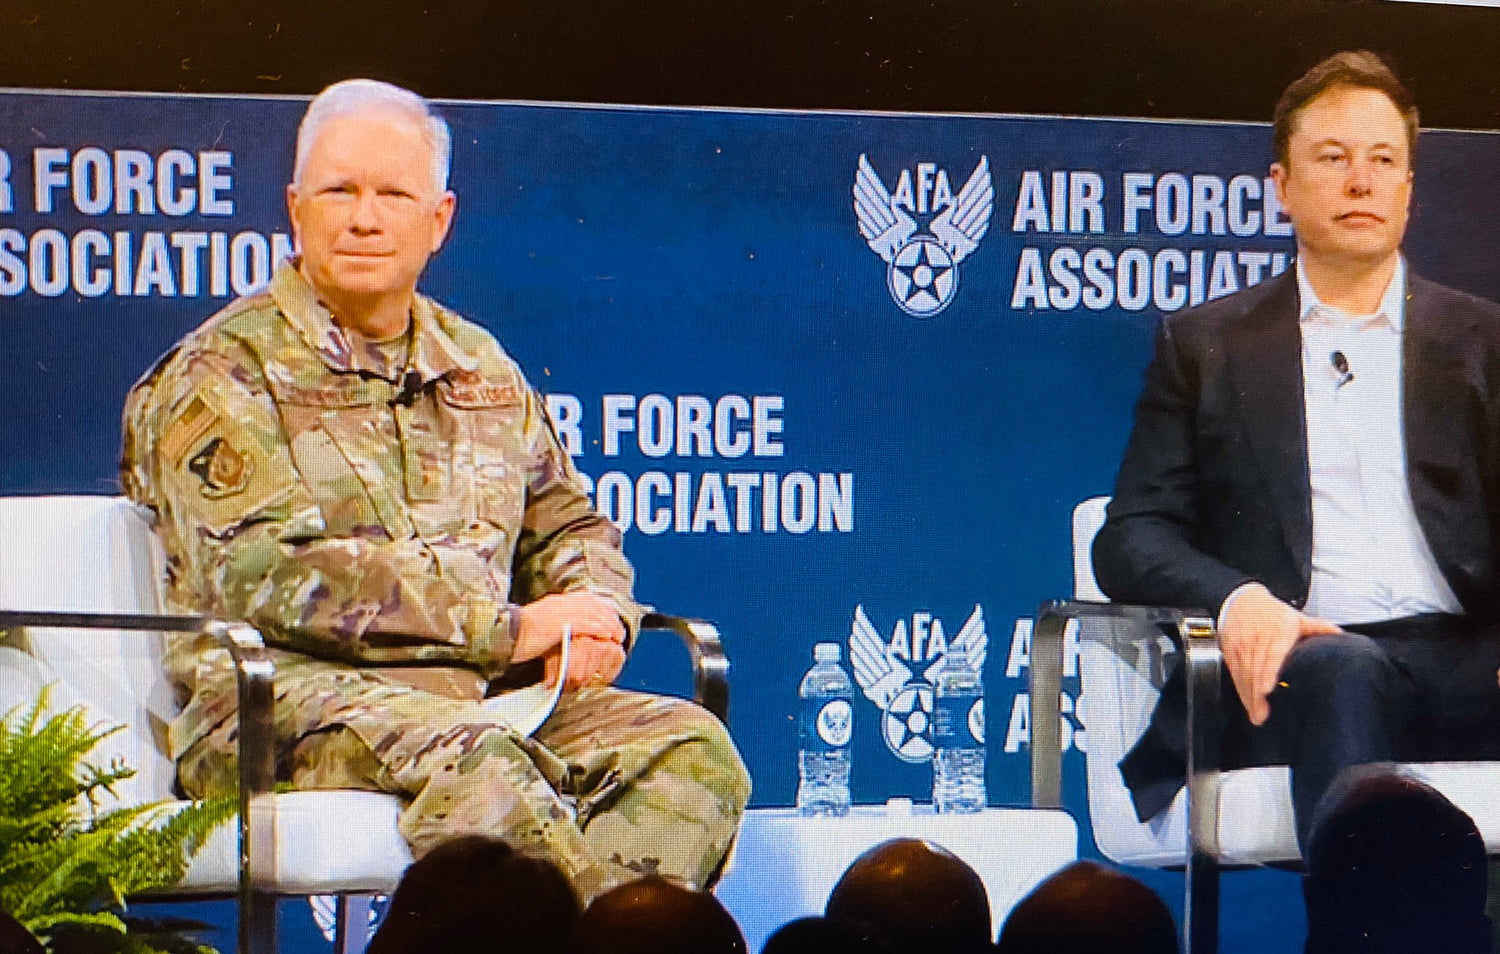 Elon Musk participated in a fireside chat at Air Force Association’s 2020 Air Warfare Symposium